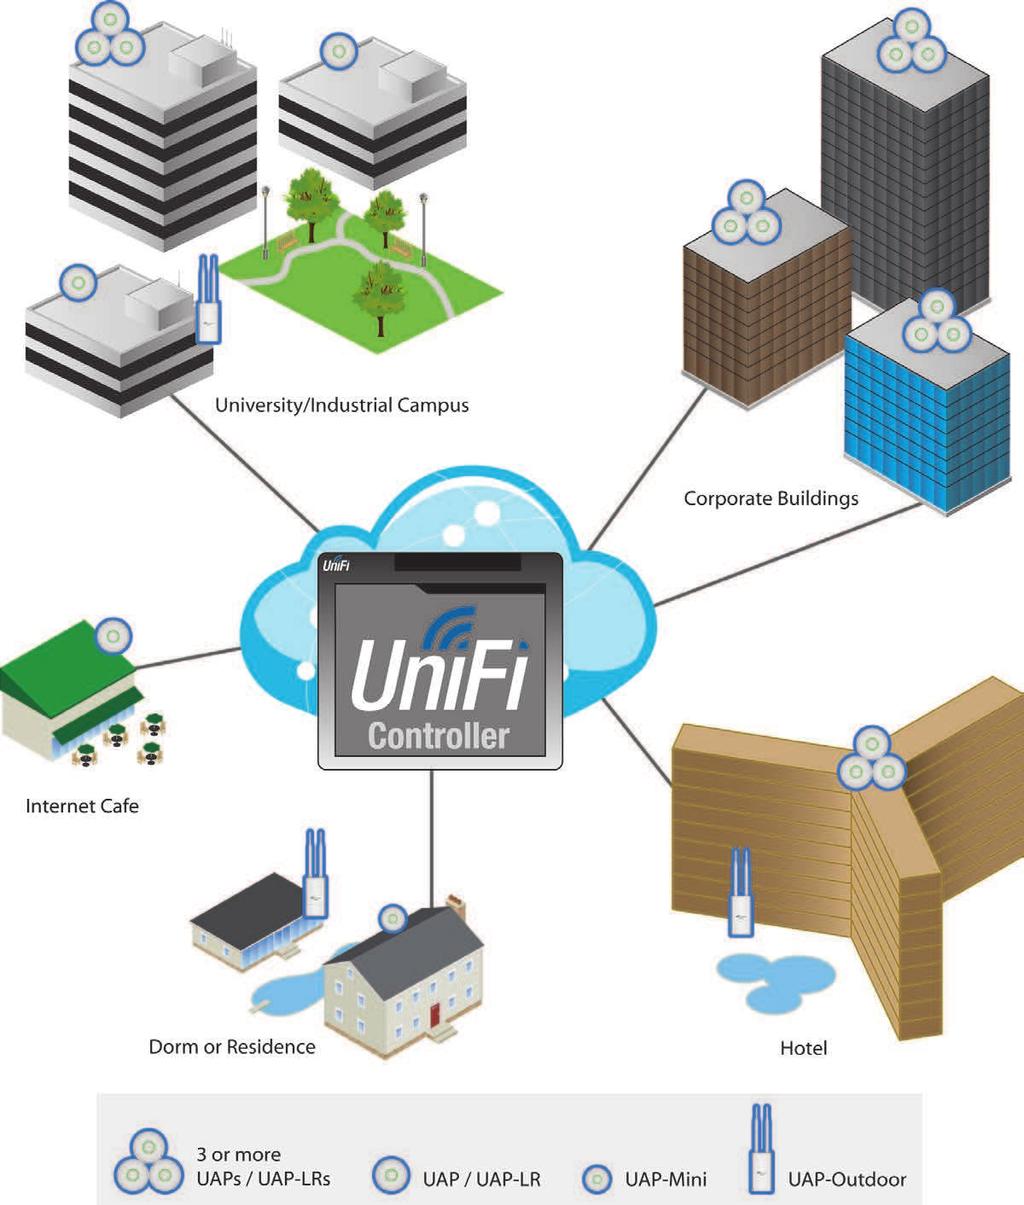 With the UniFi Controller software running in a NOC or in the cloud, administrators can extend and centrally manage wide areas of indoor and outdoor coverage using any combination of UniFi AP devices.